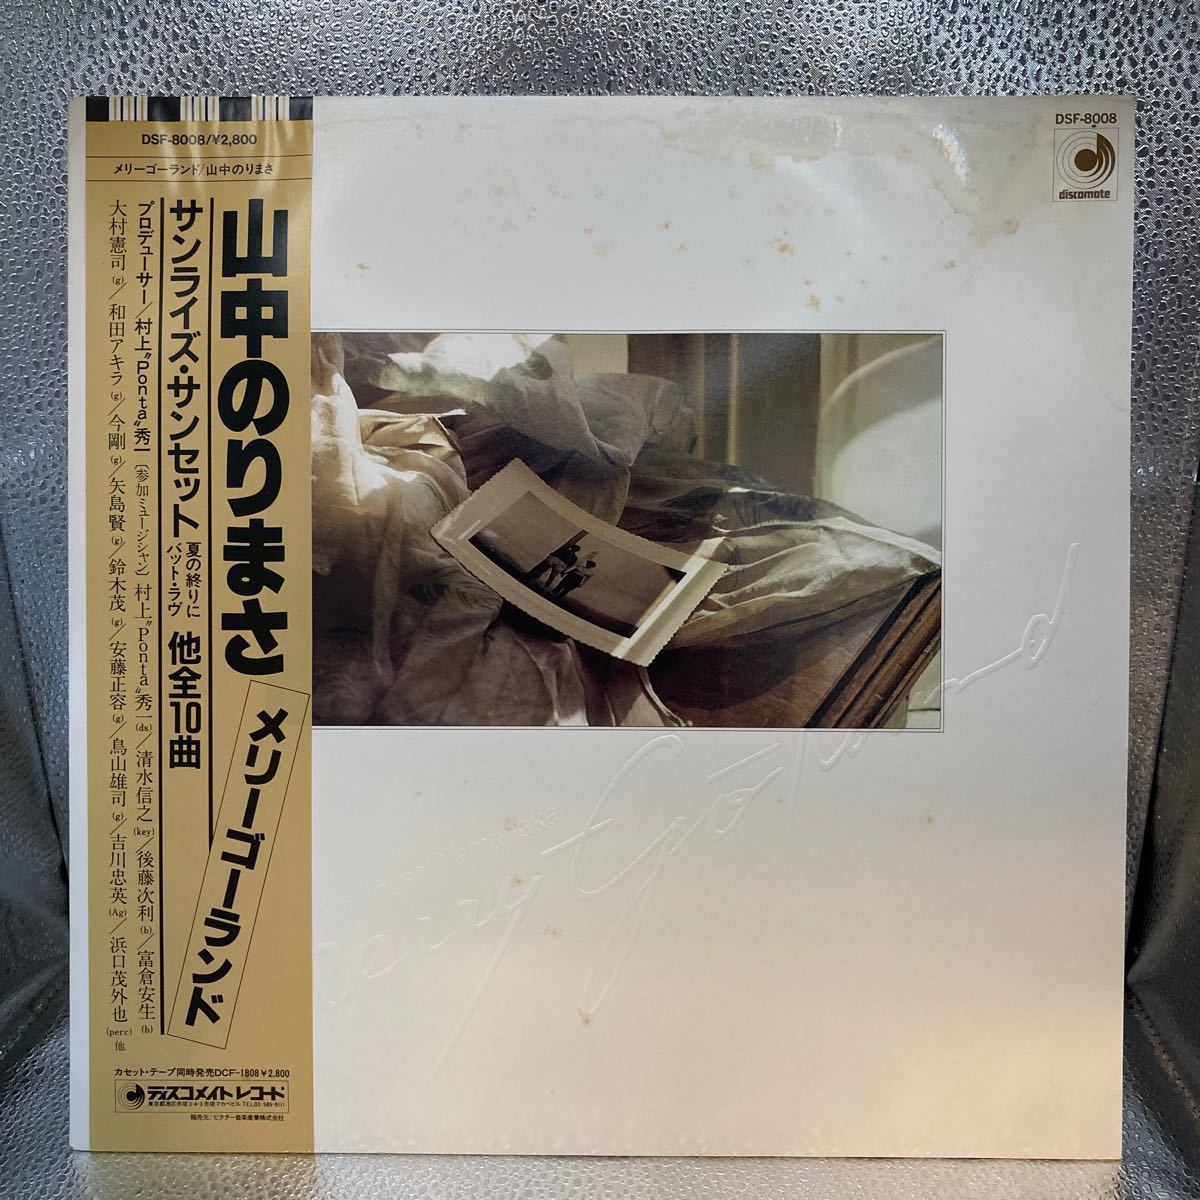  reproduction excellent ultimate beautiful record LP record mountain middle paste ../me Lee go- Land MERRY-GO-ROUND/ Murakami preeminence one / Shimizu confidence ./ large .../ Suzuki Shigeru / large ...